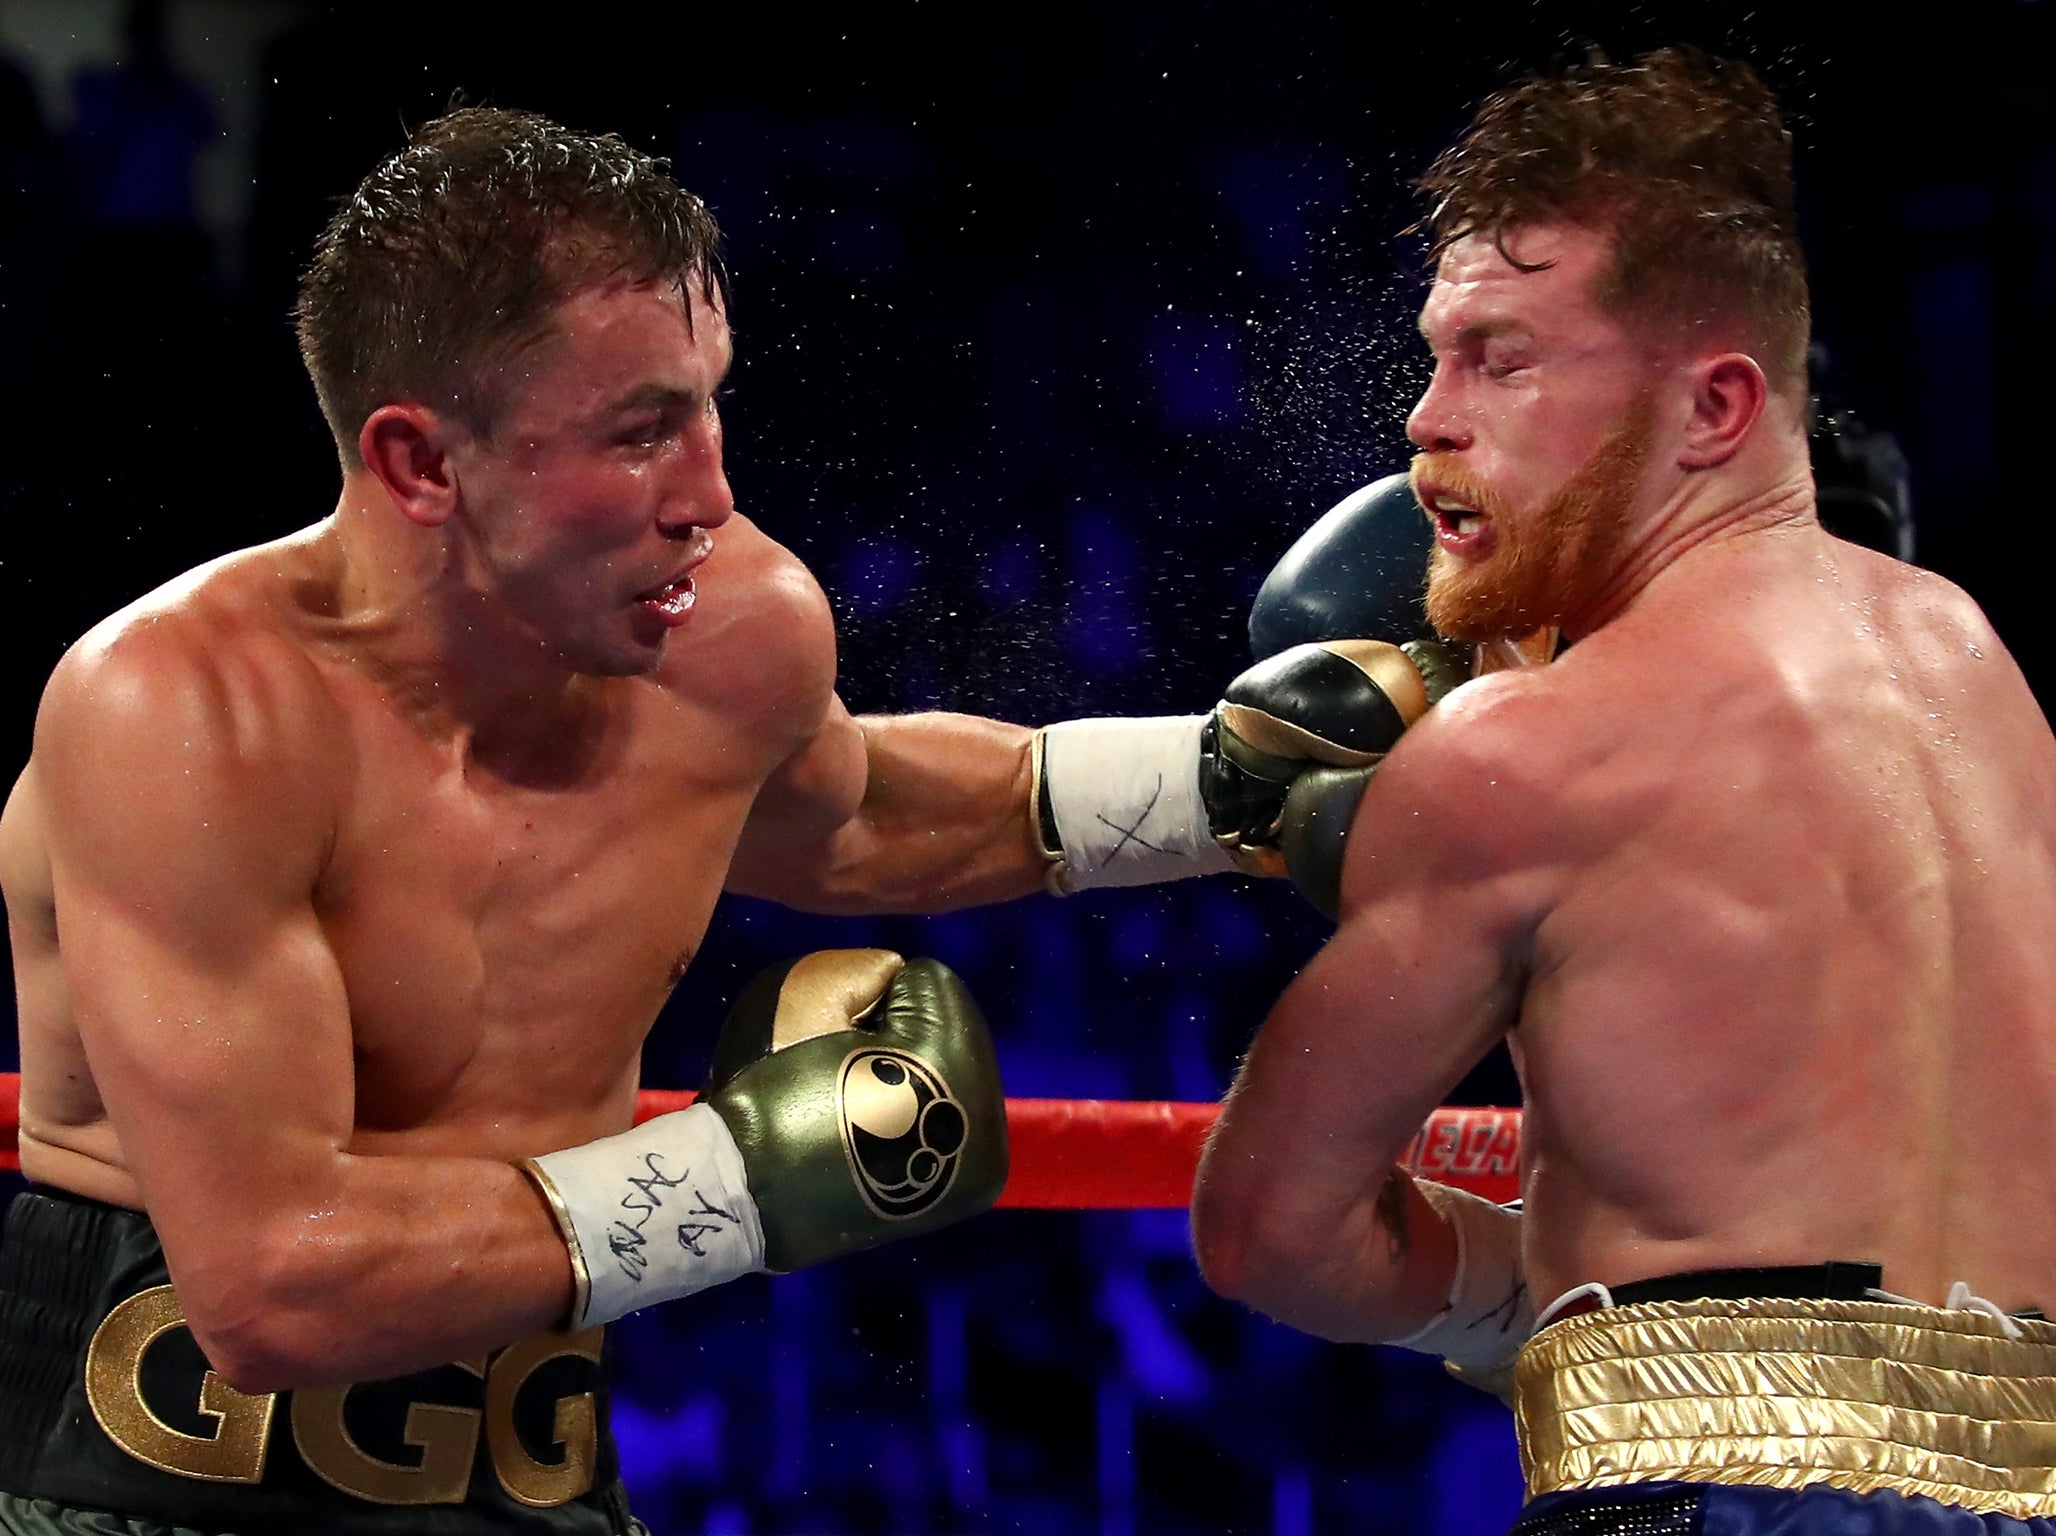 Golovkin and Canelo's rematch has been cancelled